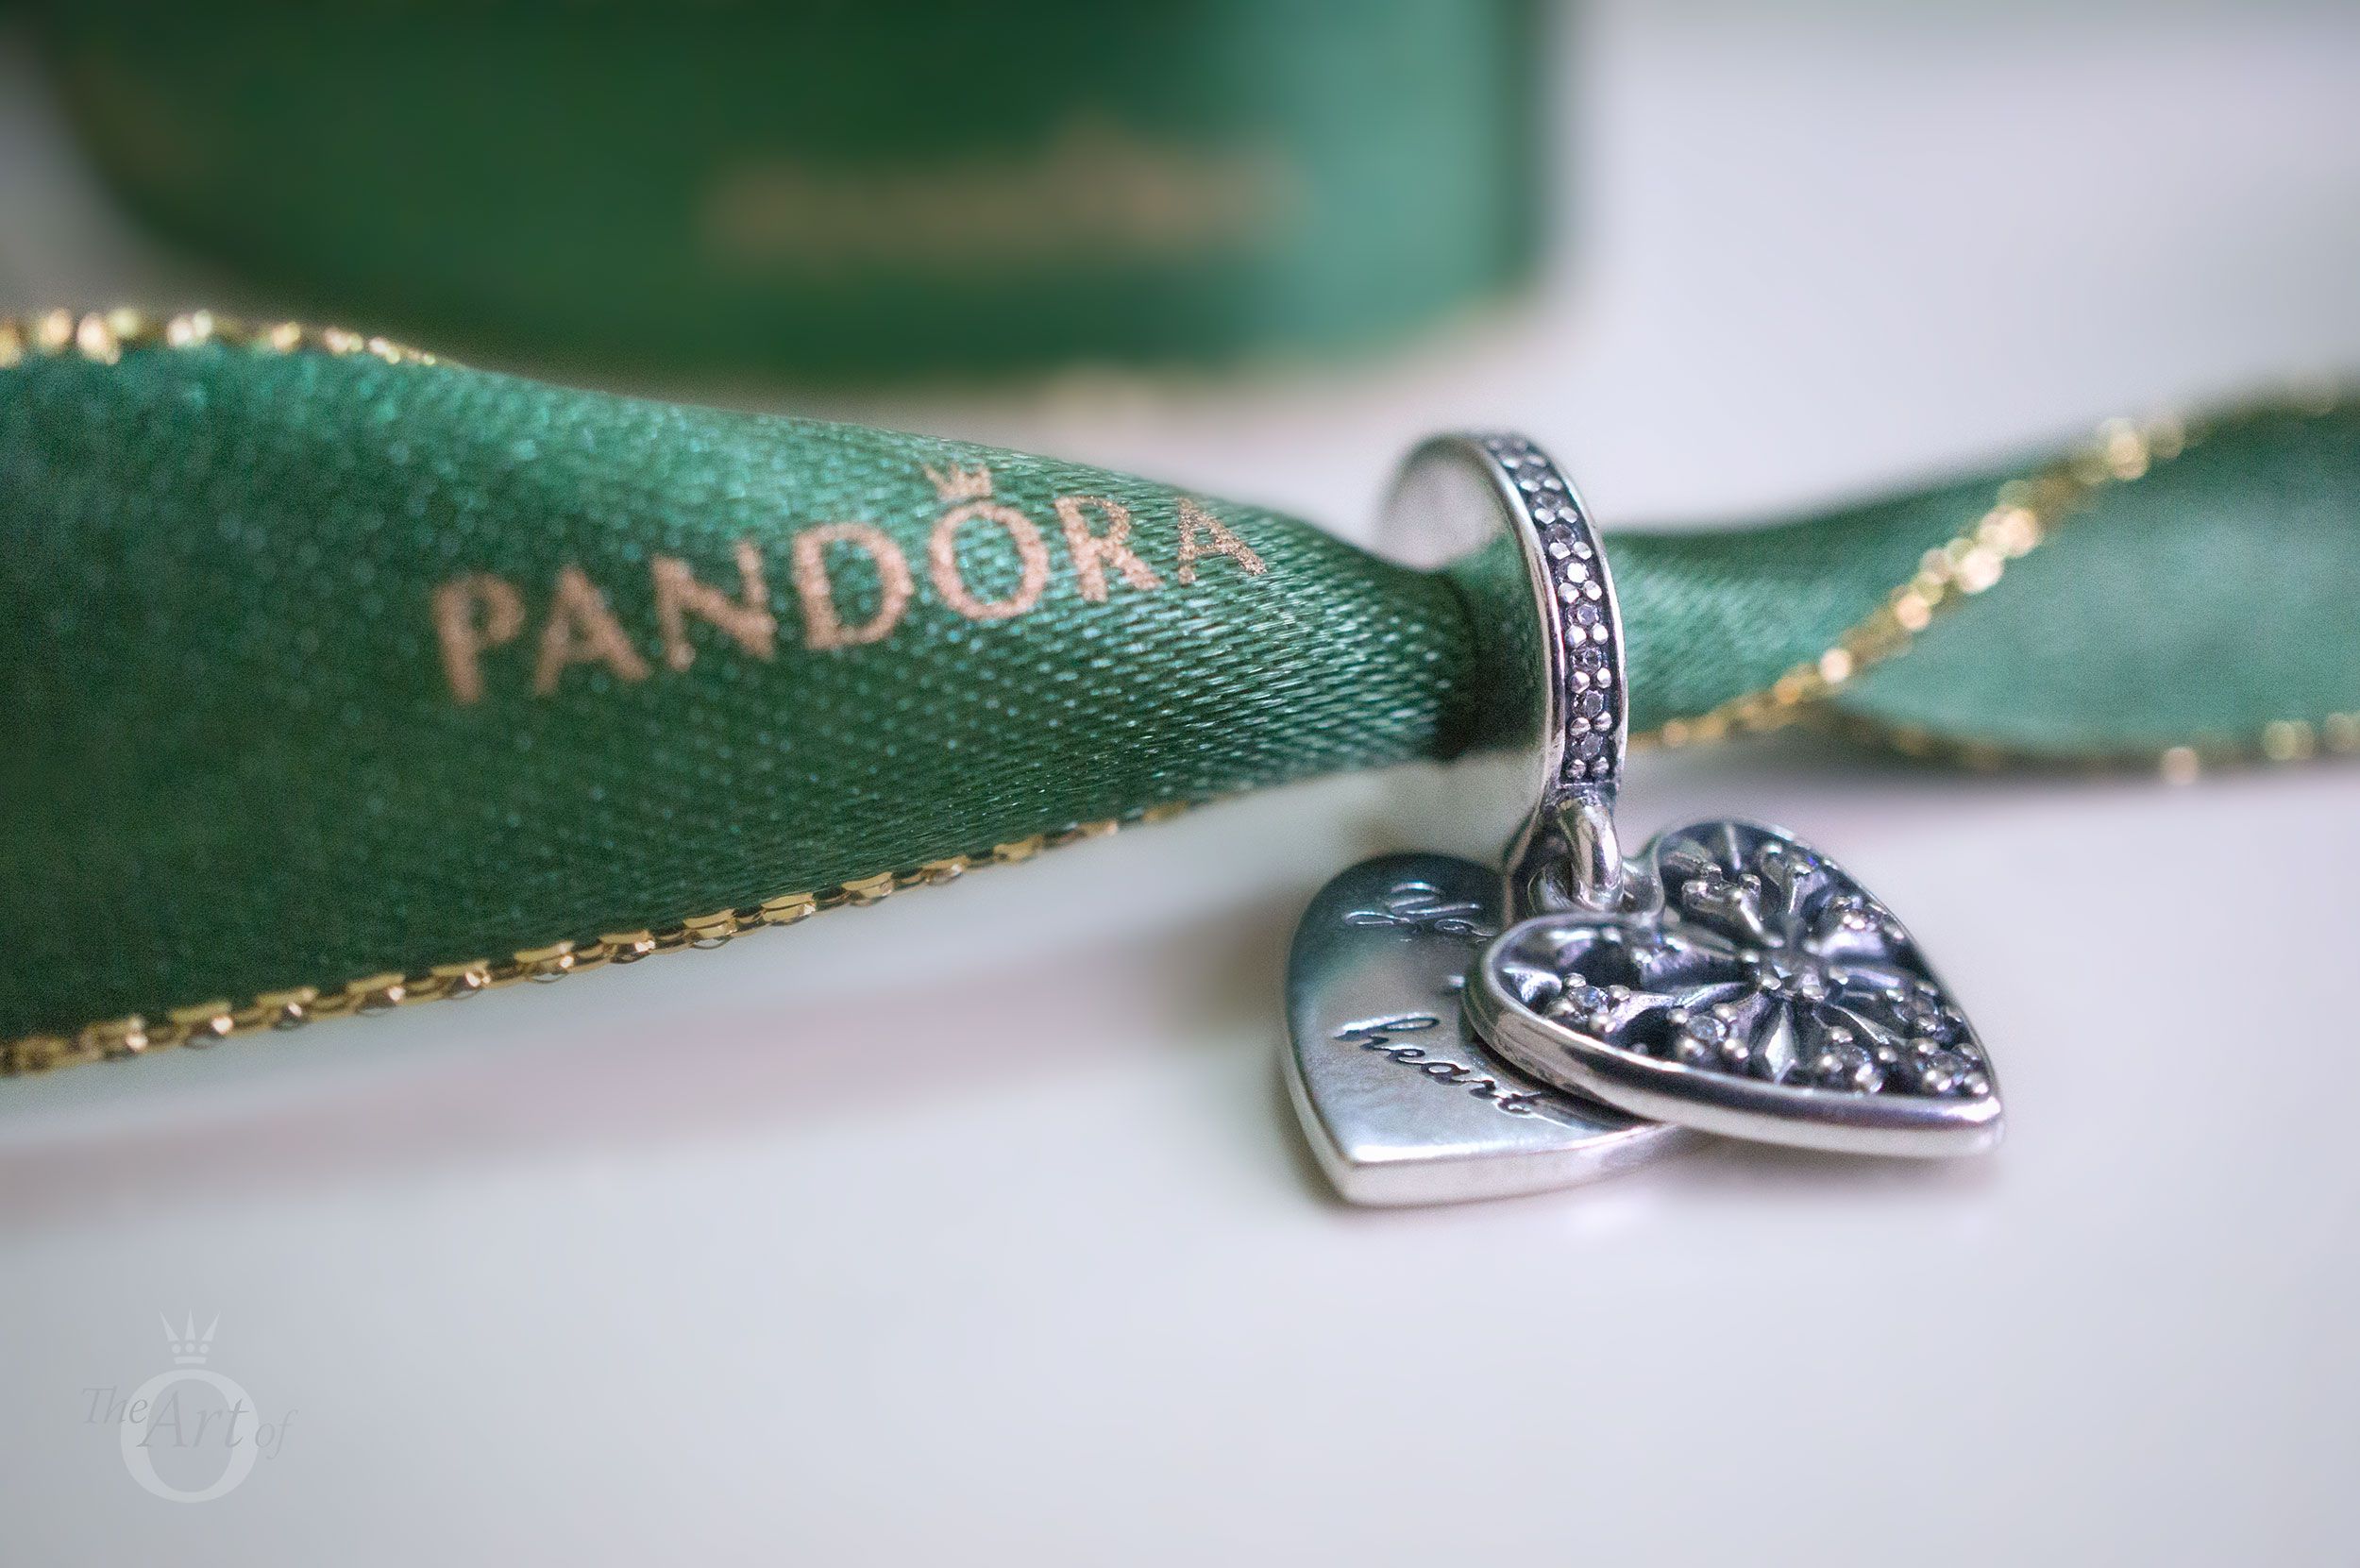 Review: Pandora Heart Of Winter Pendant Charm – The Art Of Pandora With Regard To 2019 Pandora Moments Small O Pendant Necklaces (View 16 of 25)